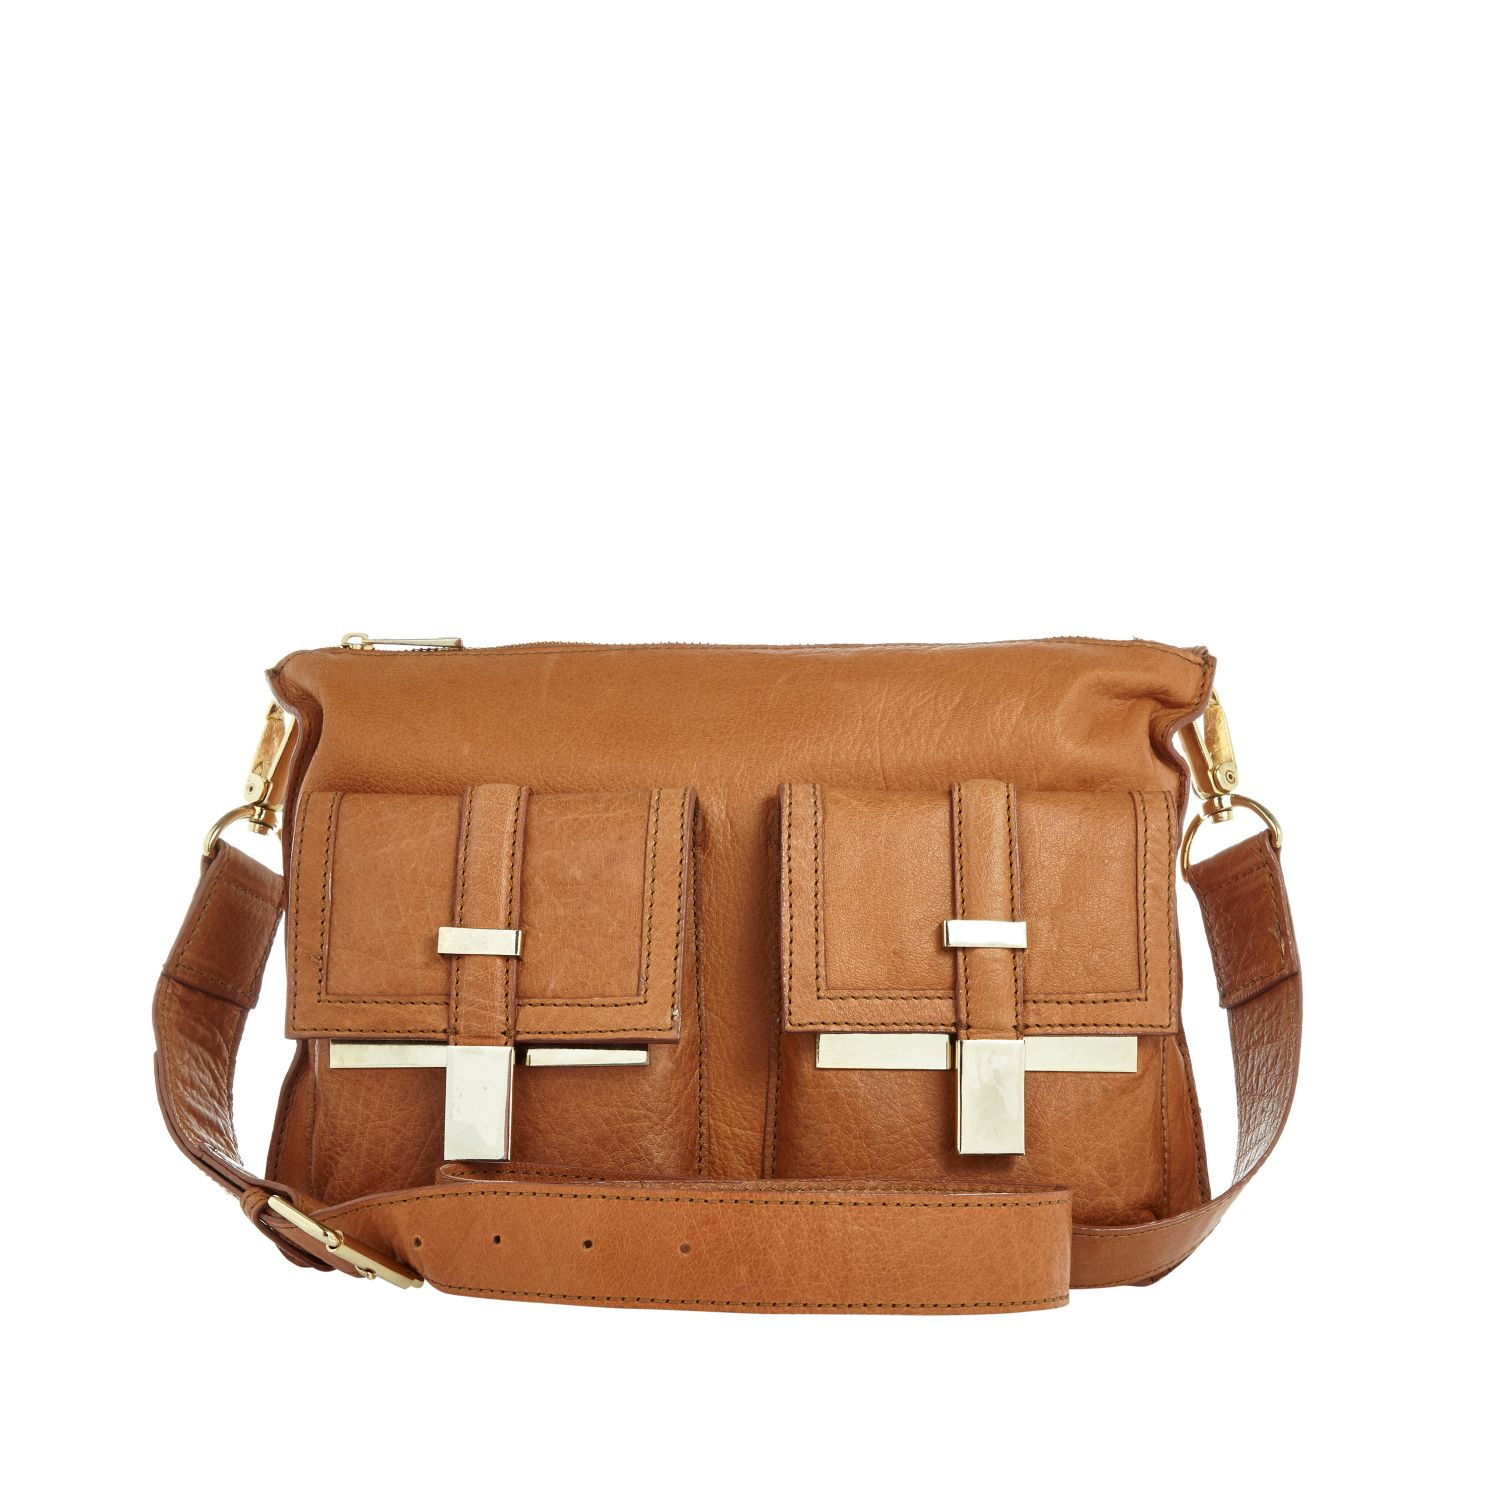 River Island Tan Leather Double Pocket Cross Body Bag in Brown (tan) | Lyst